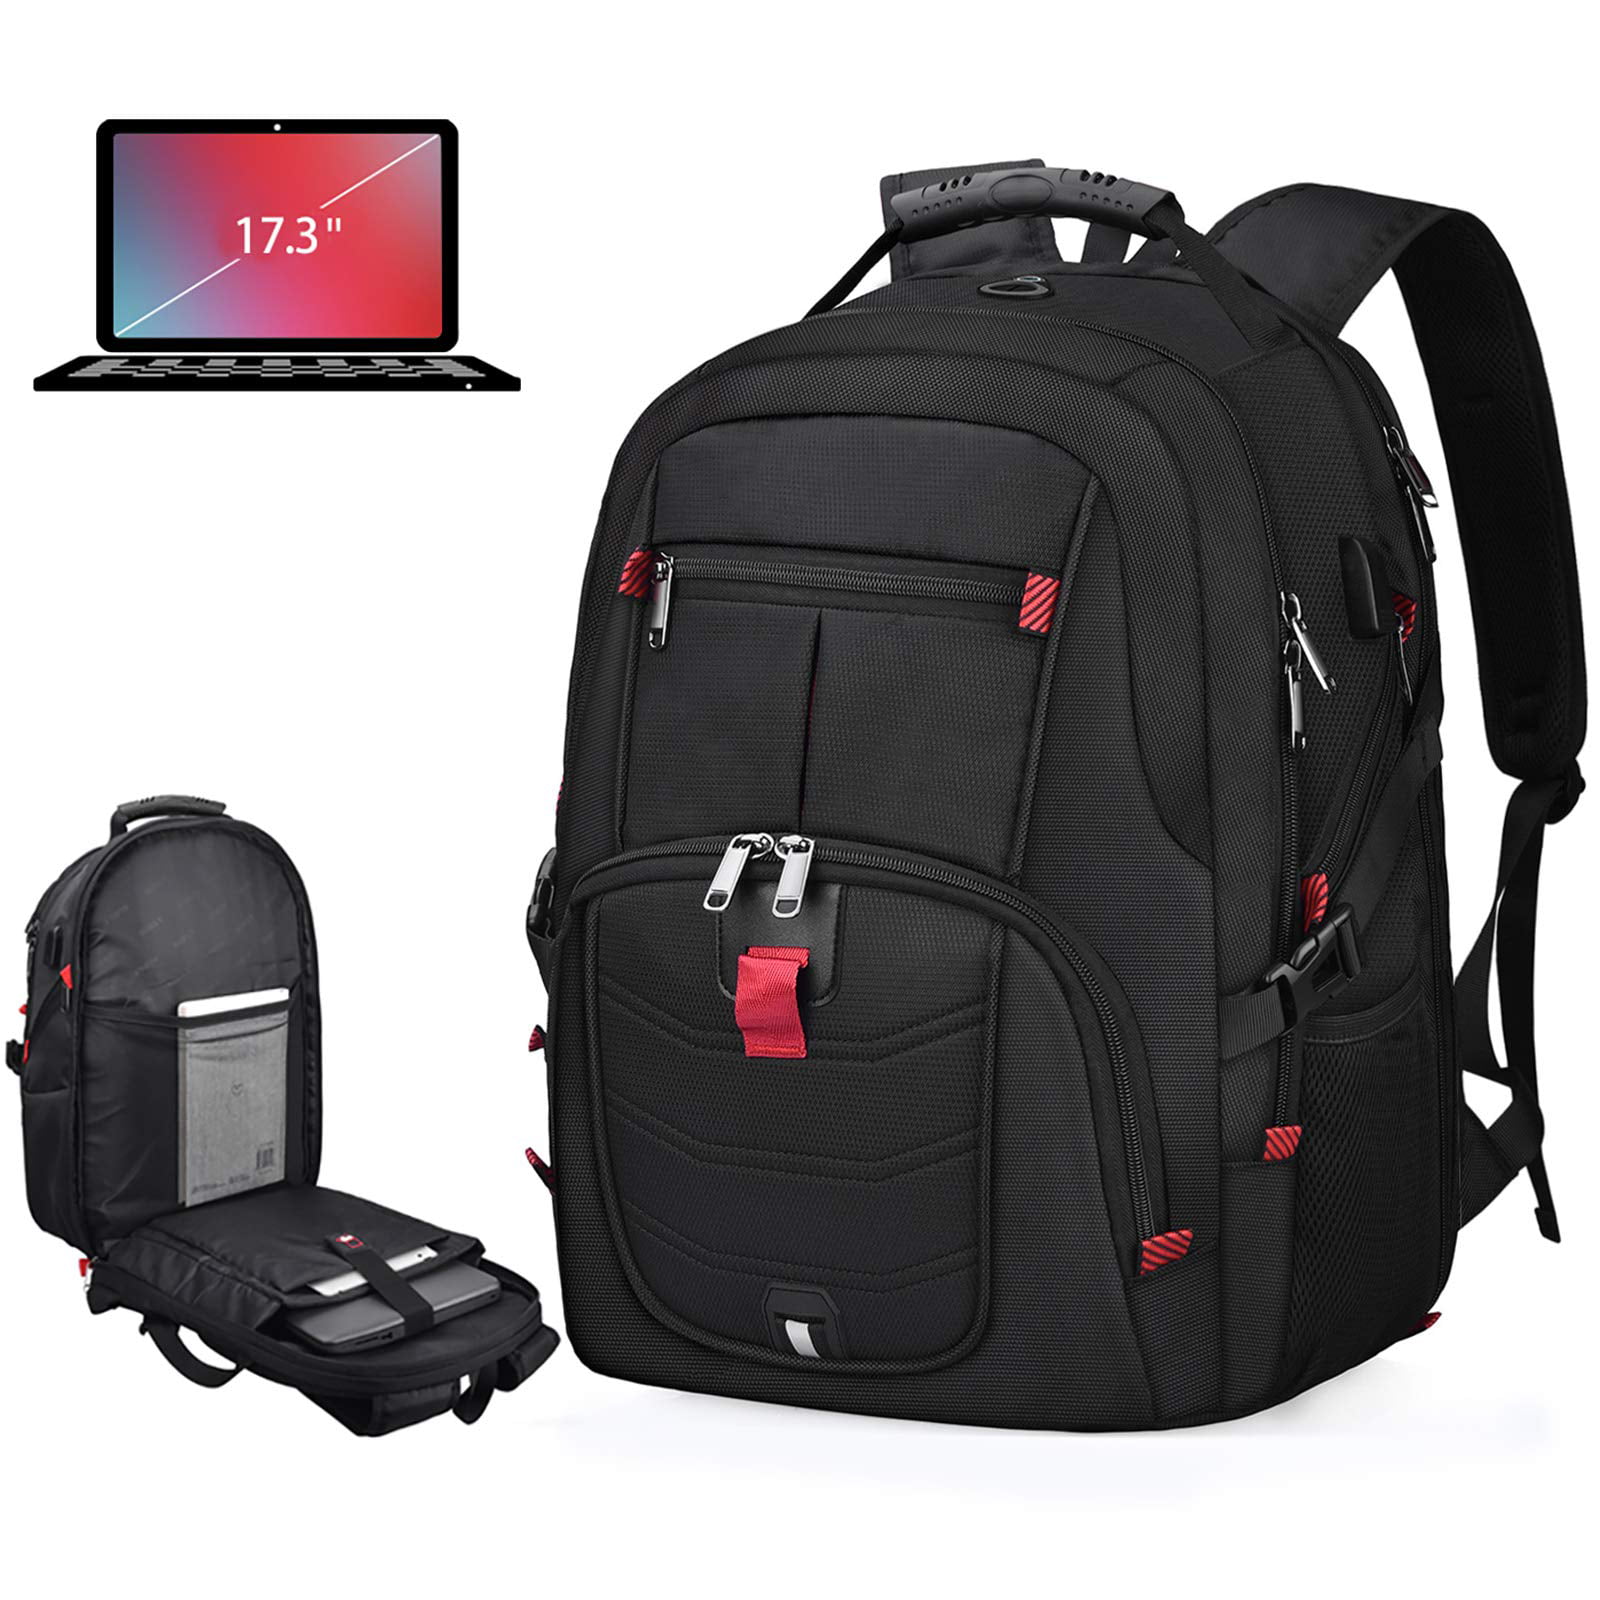 Business Computer Backpack with USB Charging Port for Men Women,Travel Daypack College Backpack,Water Resistant School Bookbag Fit 17.3 inch Laptop-Black C/H Anti Theft Laptop Backpack